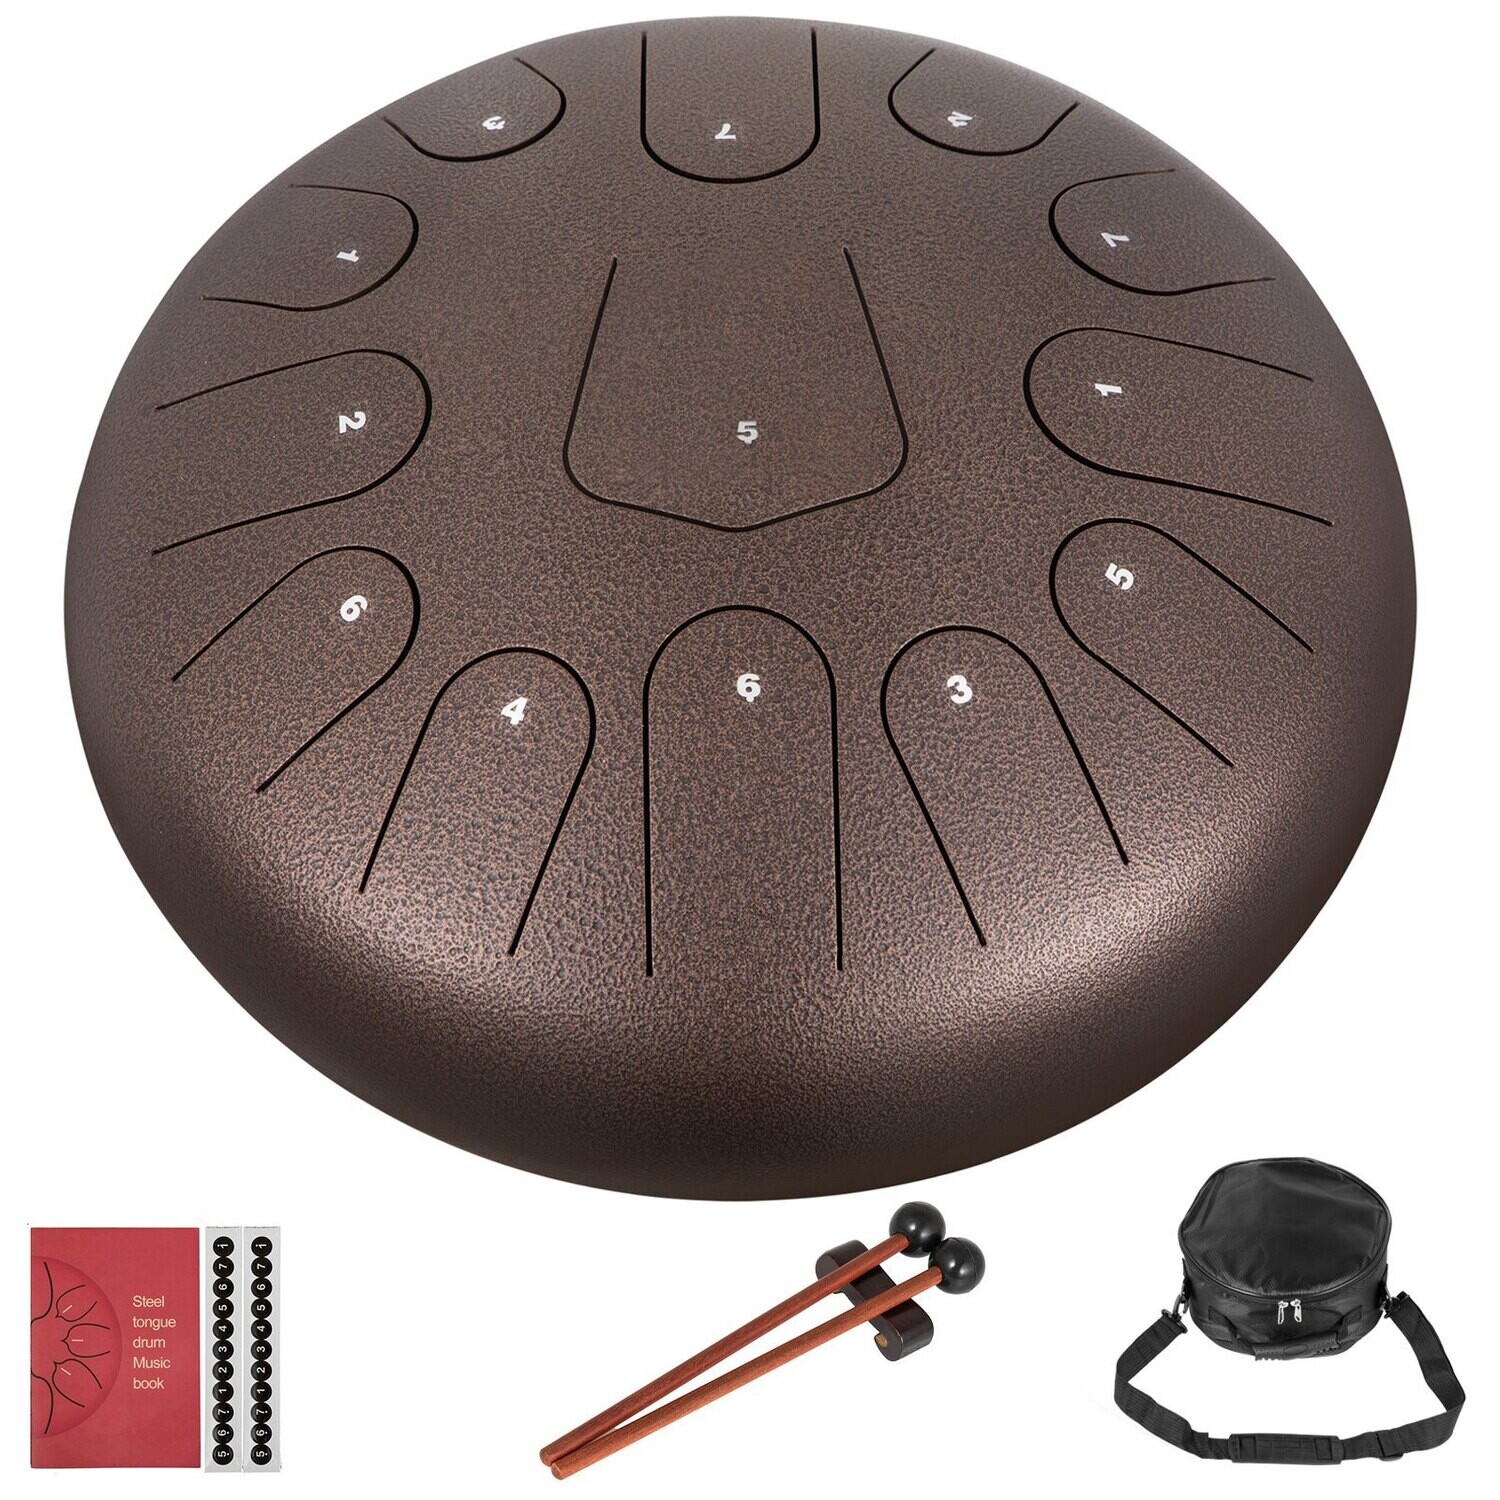 Steel Drum 13 Notes Percussion Instrument, 12 Inches Tongue Drum, Steel Tongue Drum, With Bag, Book, Mallets, Mallet Bracket, Hang Pan , Chestnut